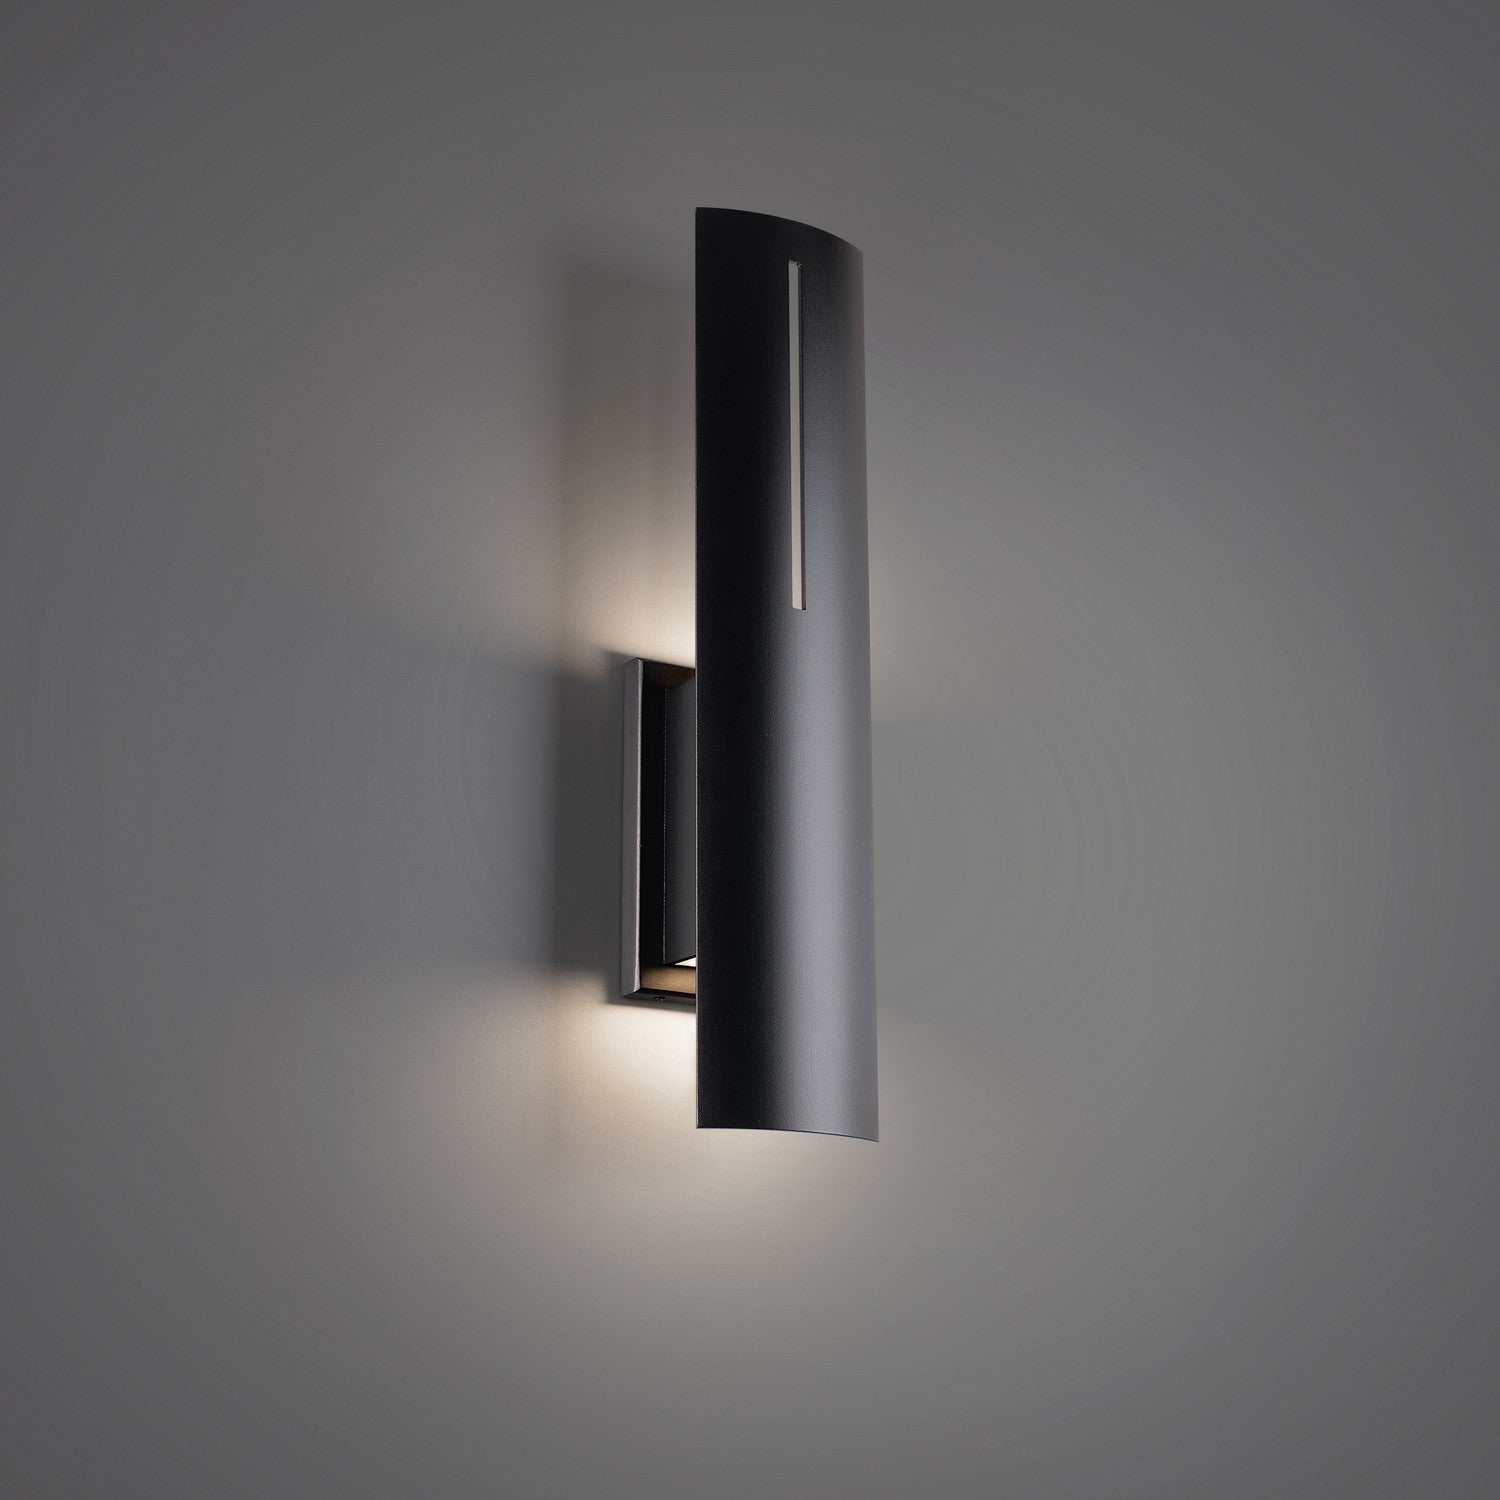 Modern Forms Canada - WS-W22320-30-BK - LED Outdoor Wall Sconce - Aegis - Black